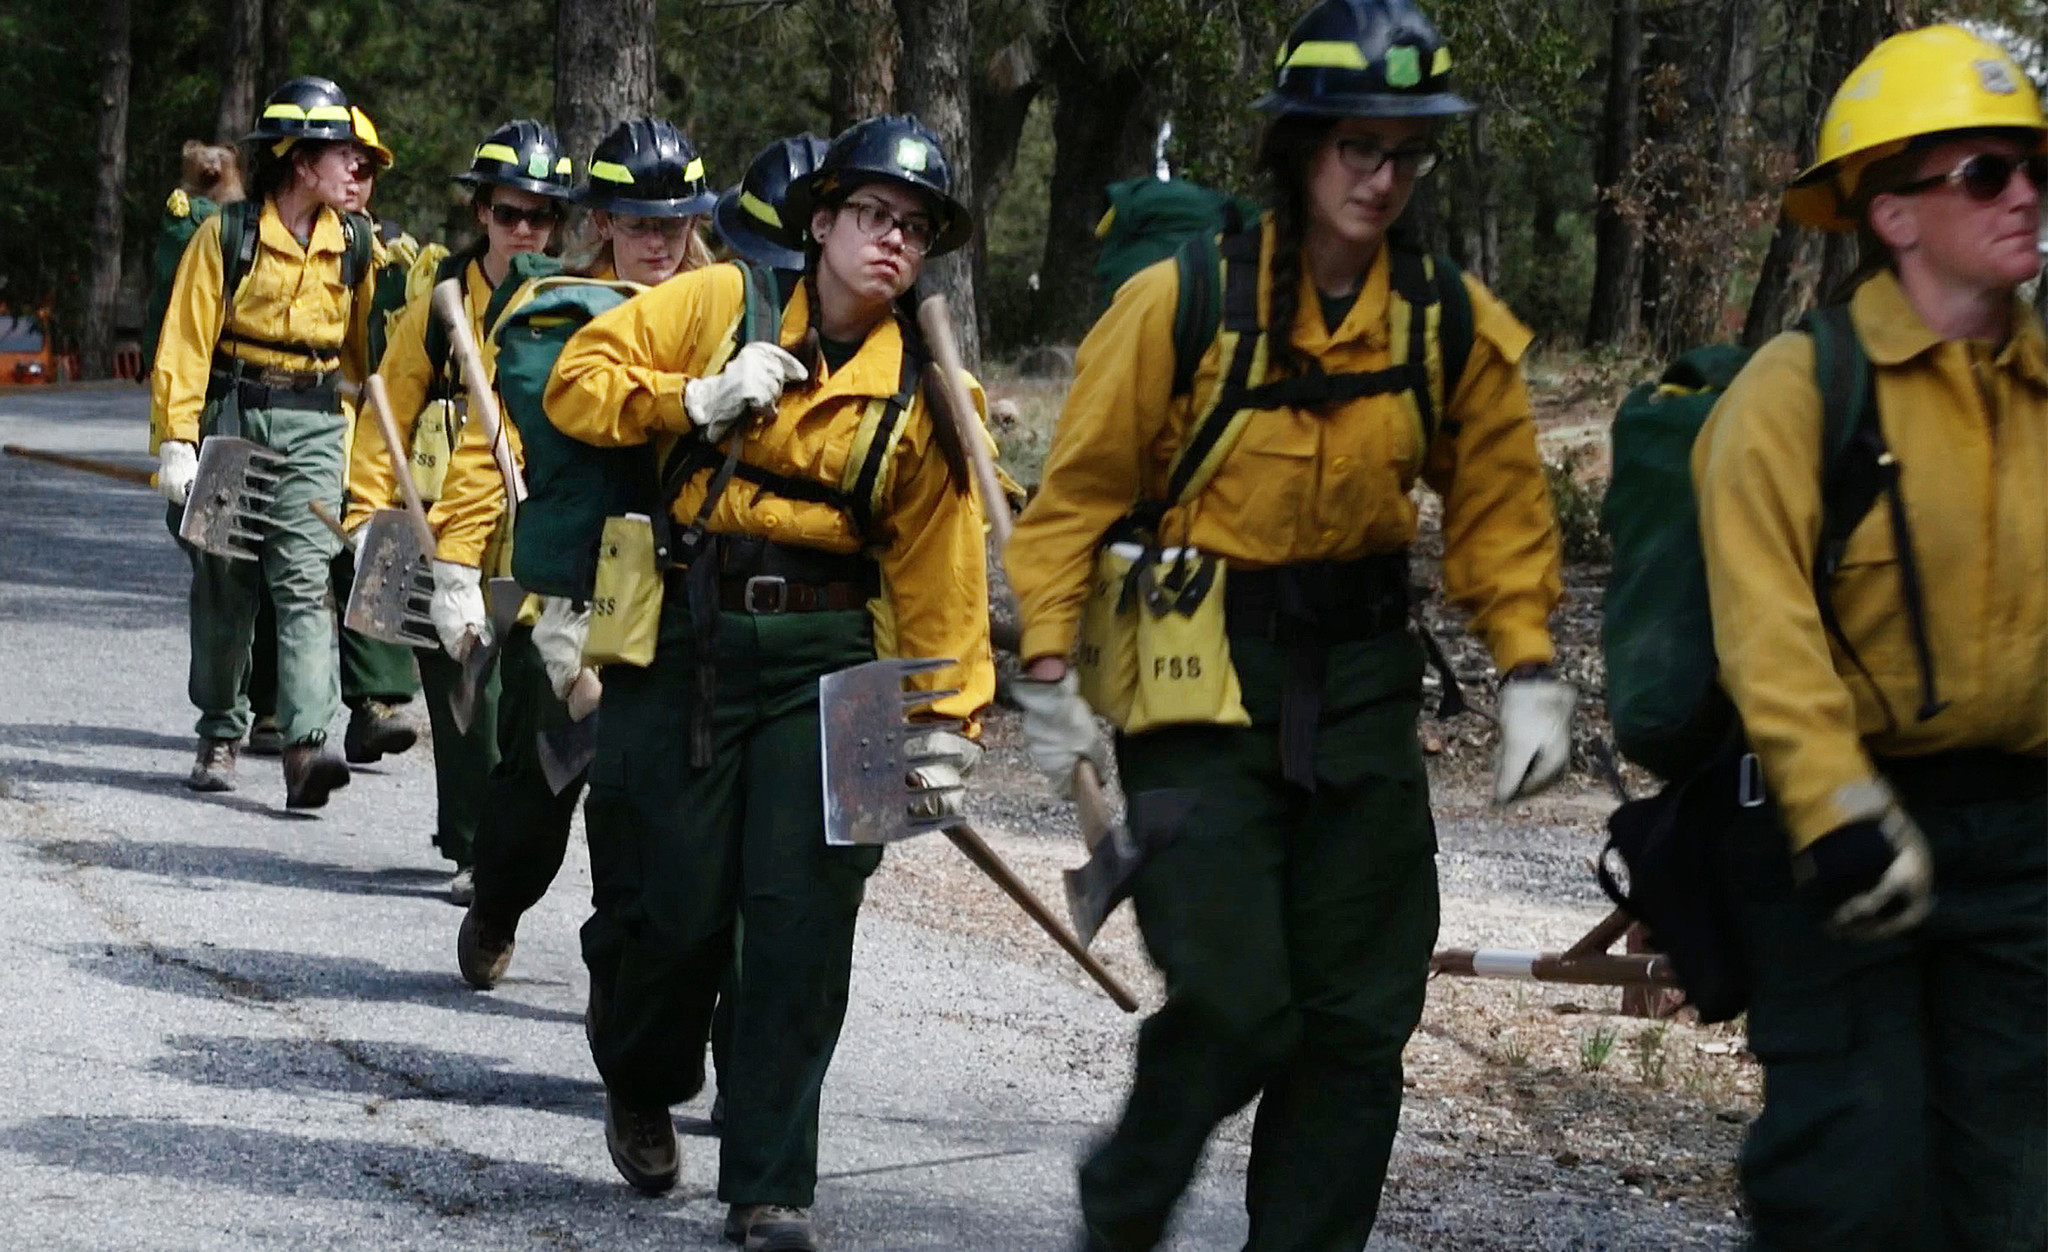 Trainees line up for their final test. The Forest Service’s program offers women a chance to launch new firefighting careers.